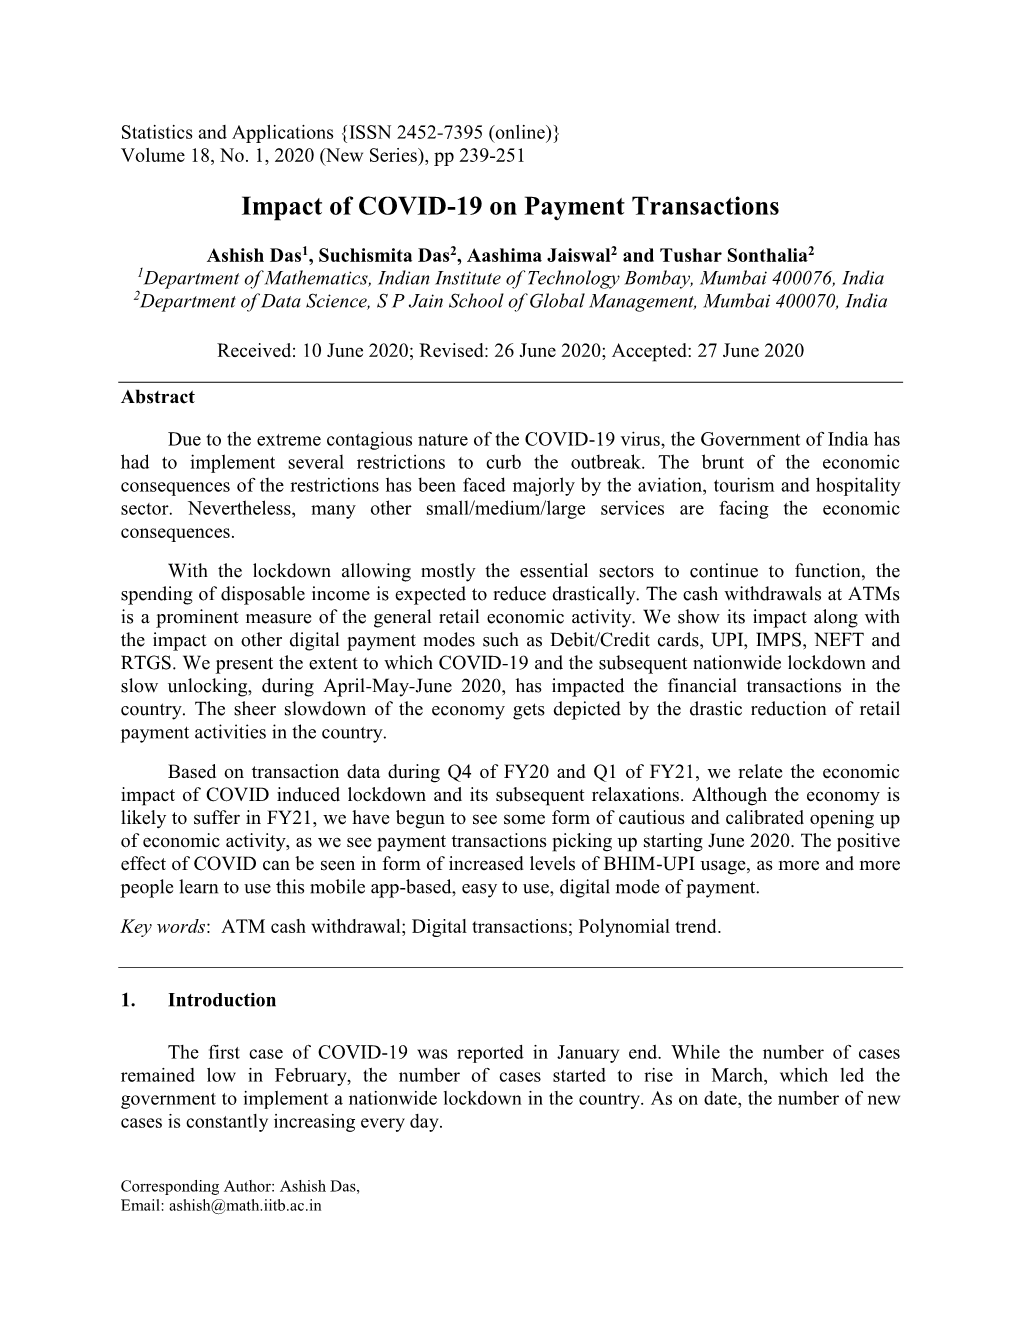 Impact of COVID-19 on Payment Transactions